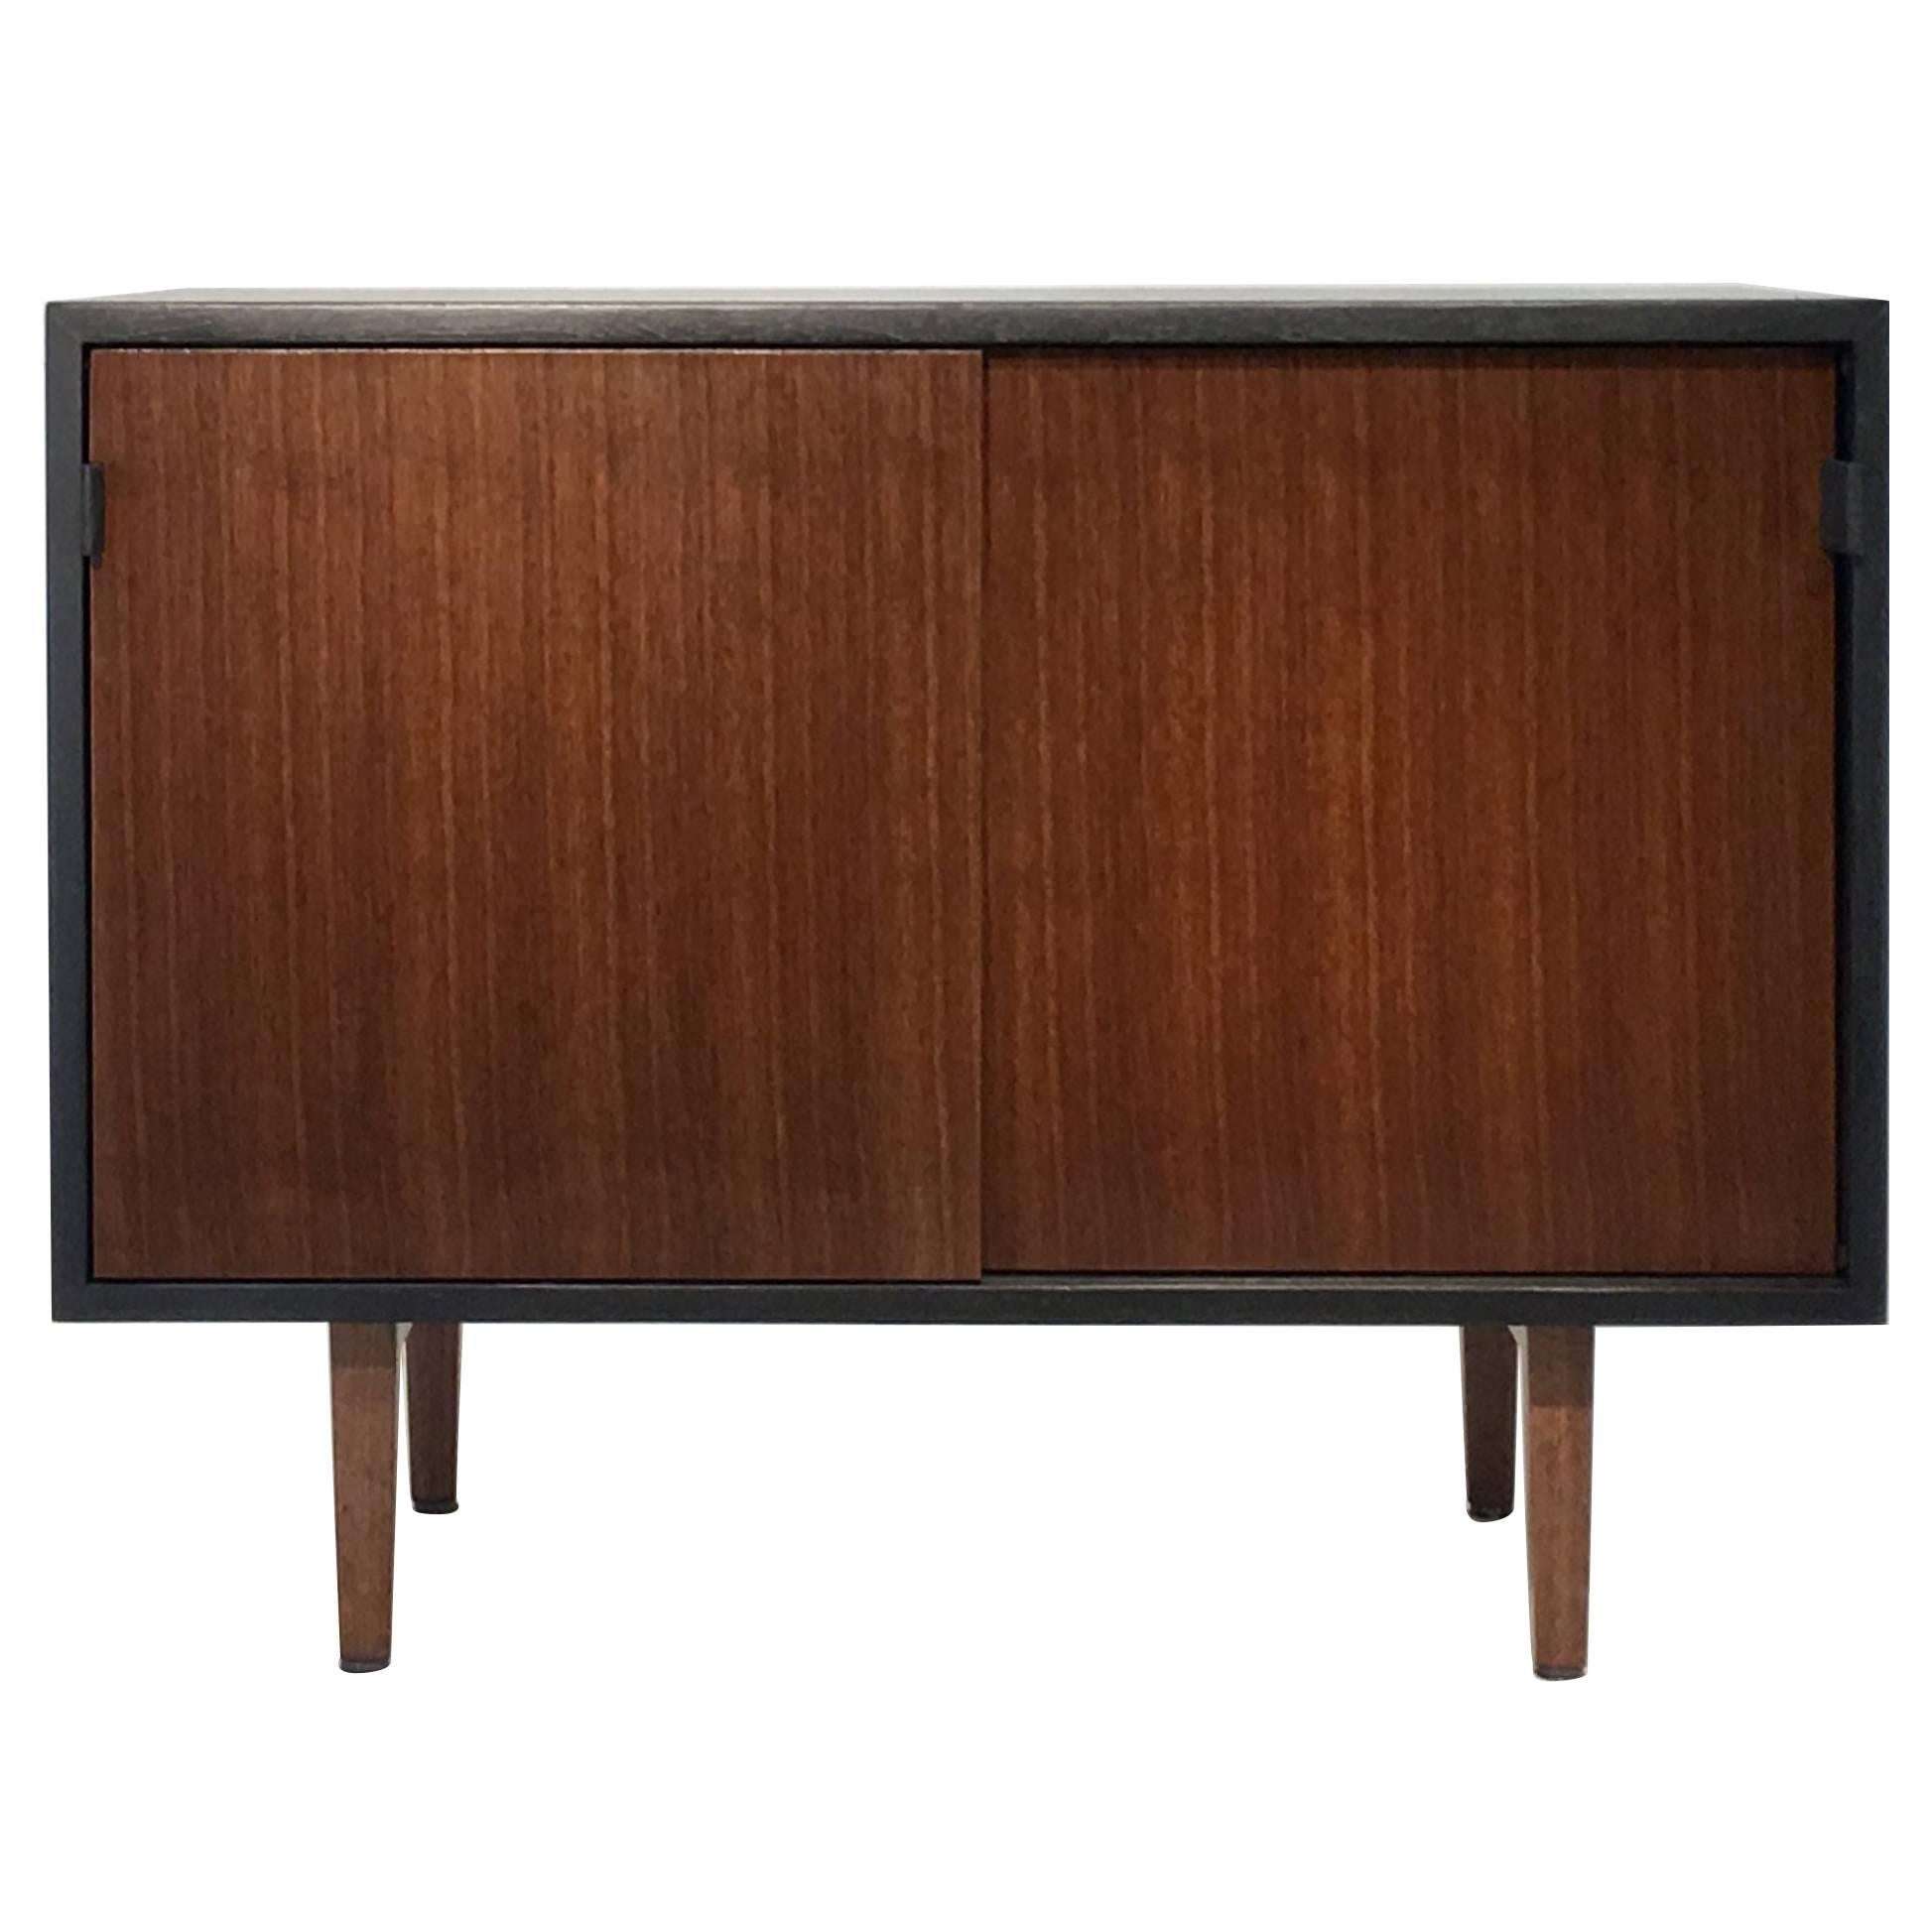 Cabinet by Florence Knoll for Knoll Associates